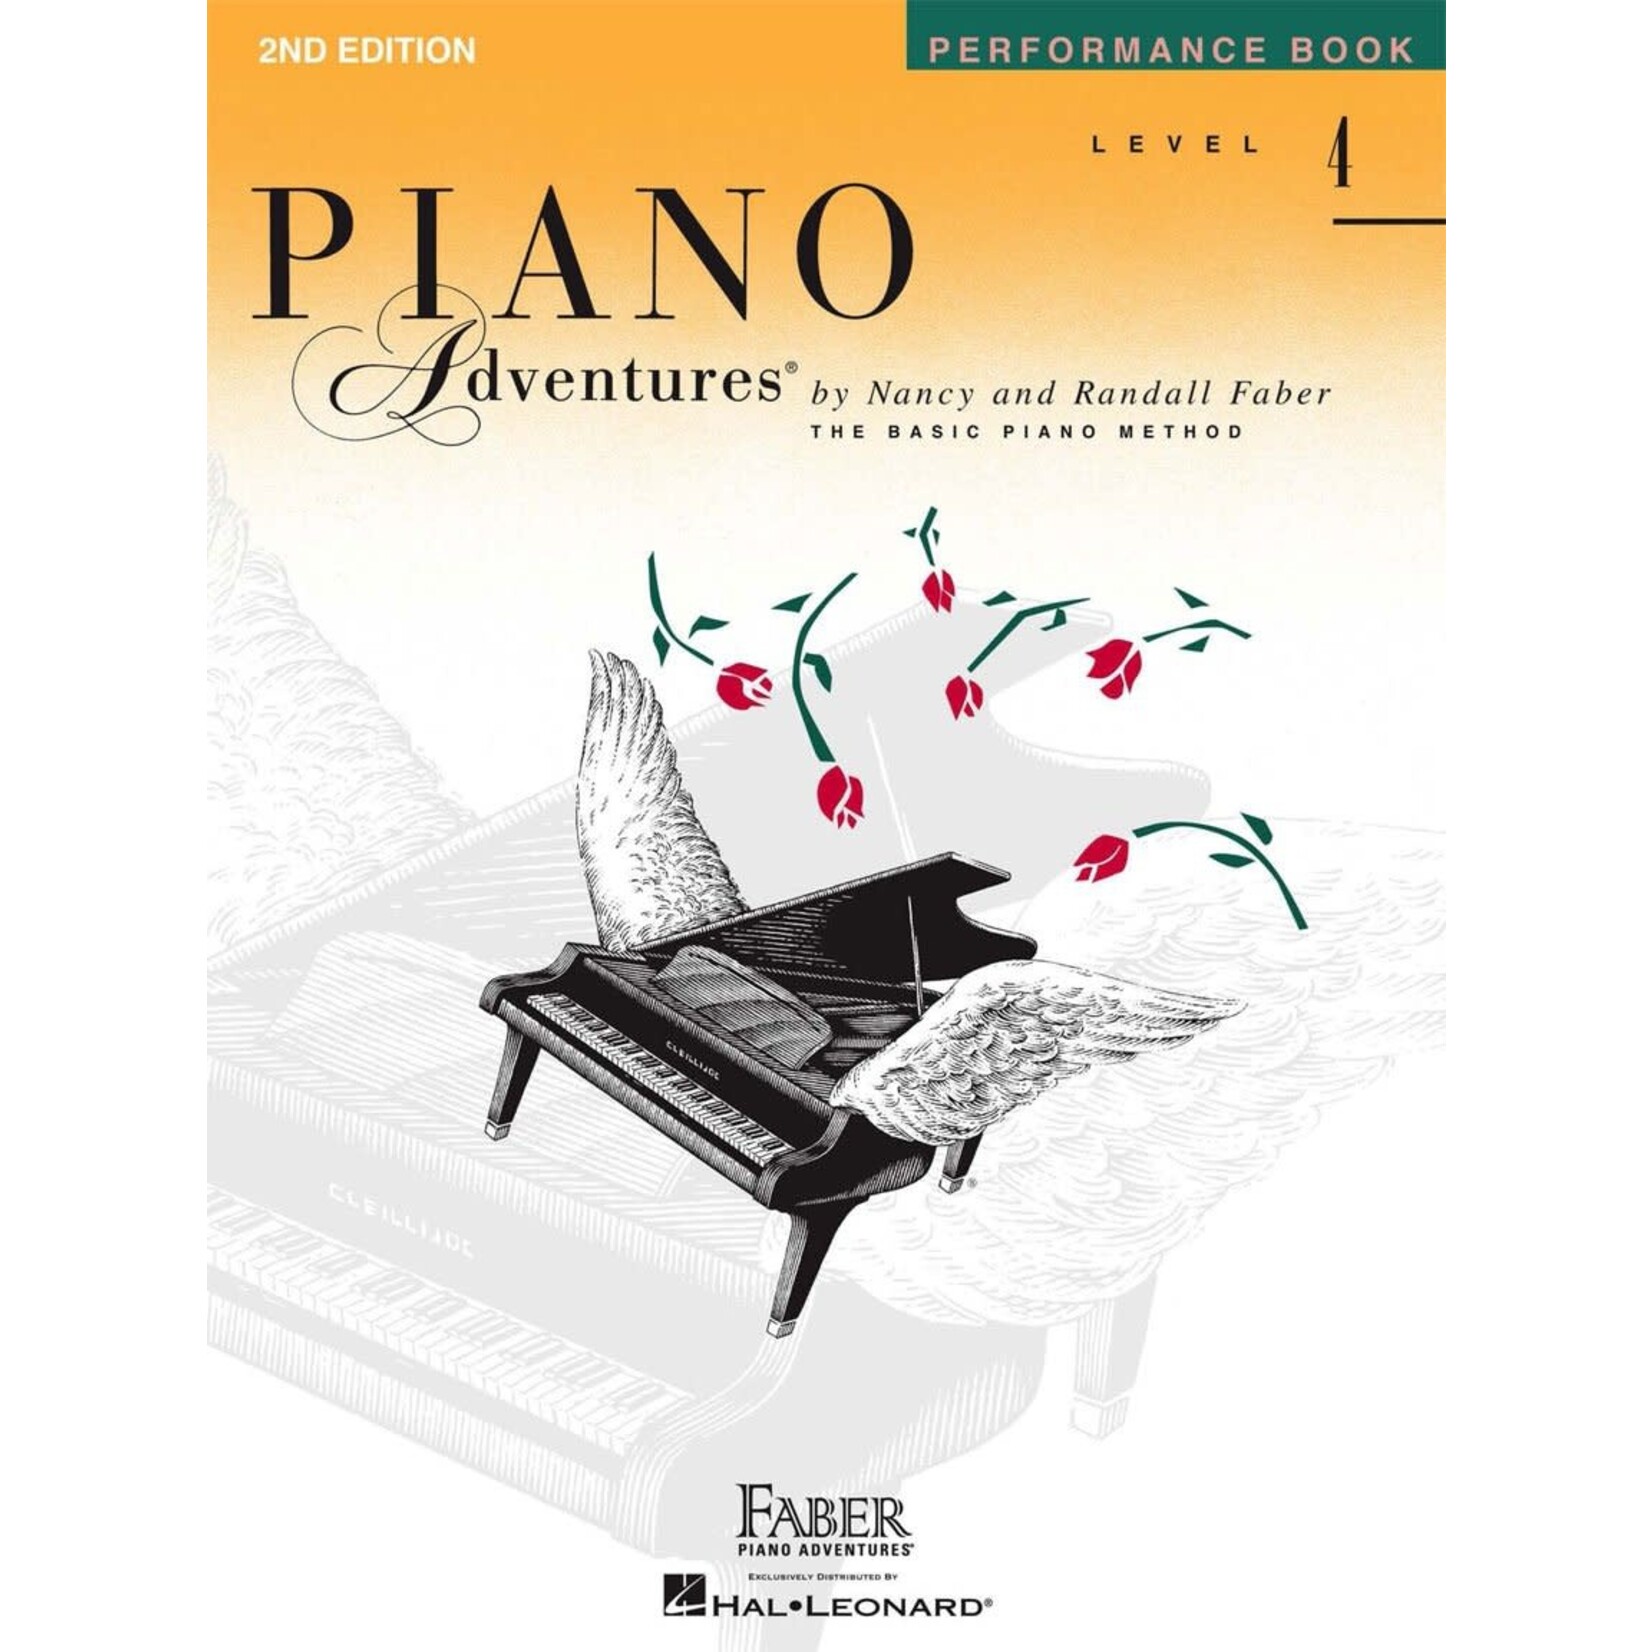 Faber Piano Adventures Level 4 - Performance Book - Faber 2nd Edition